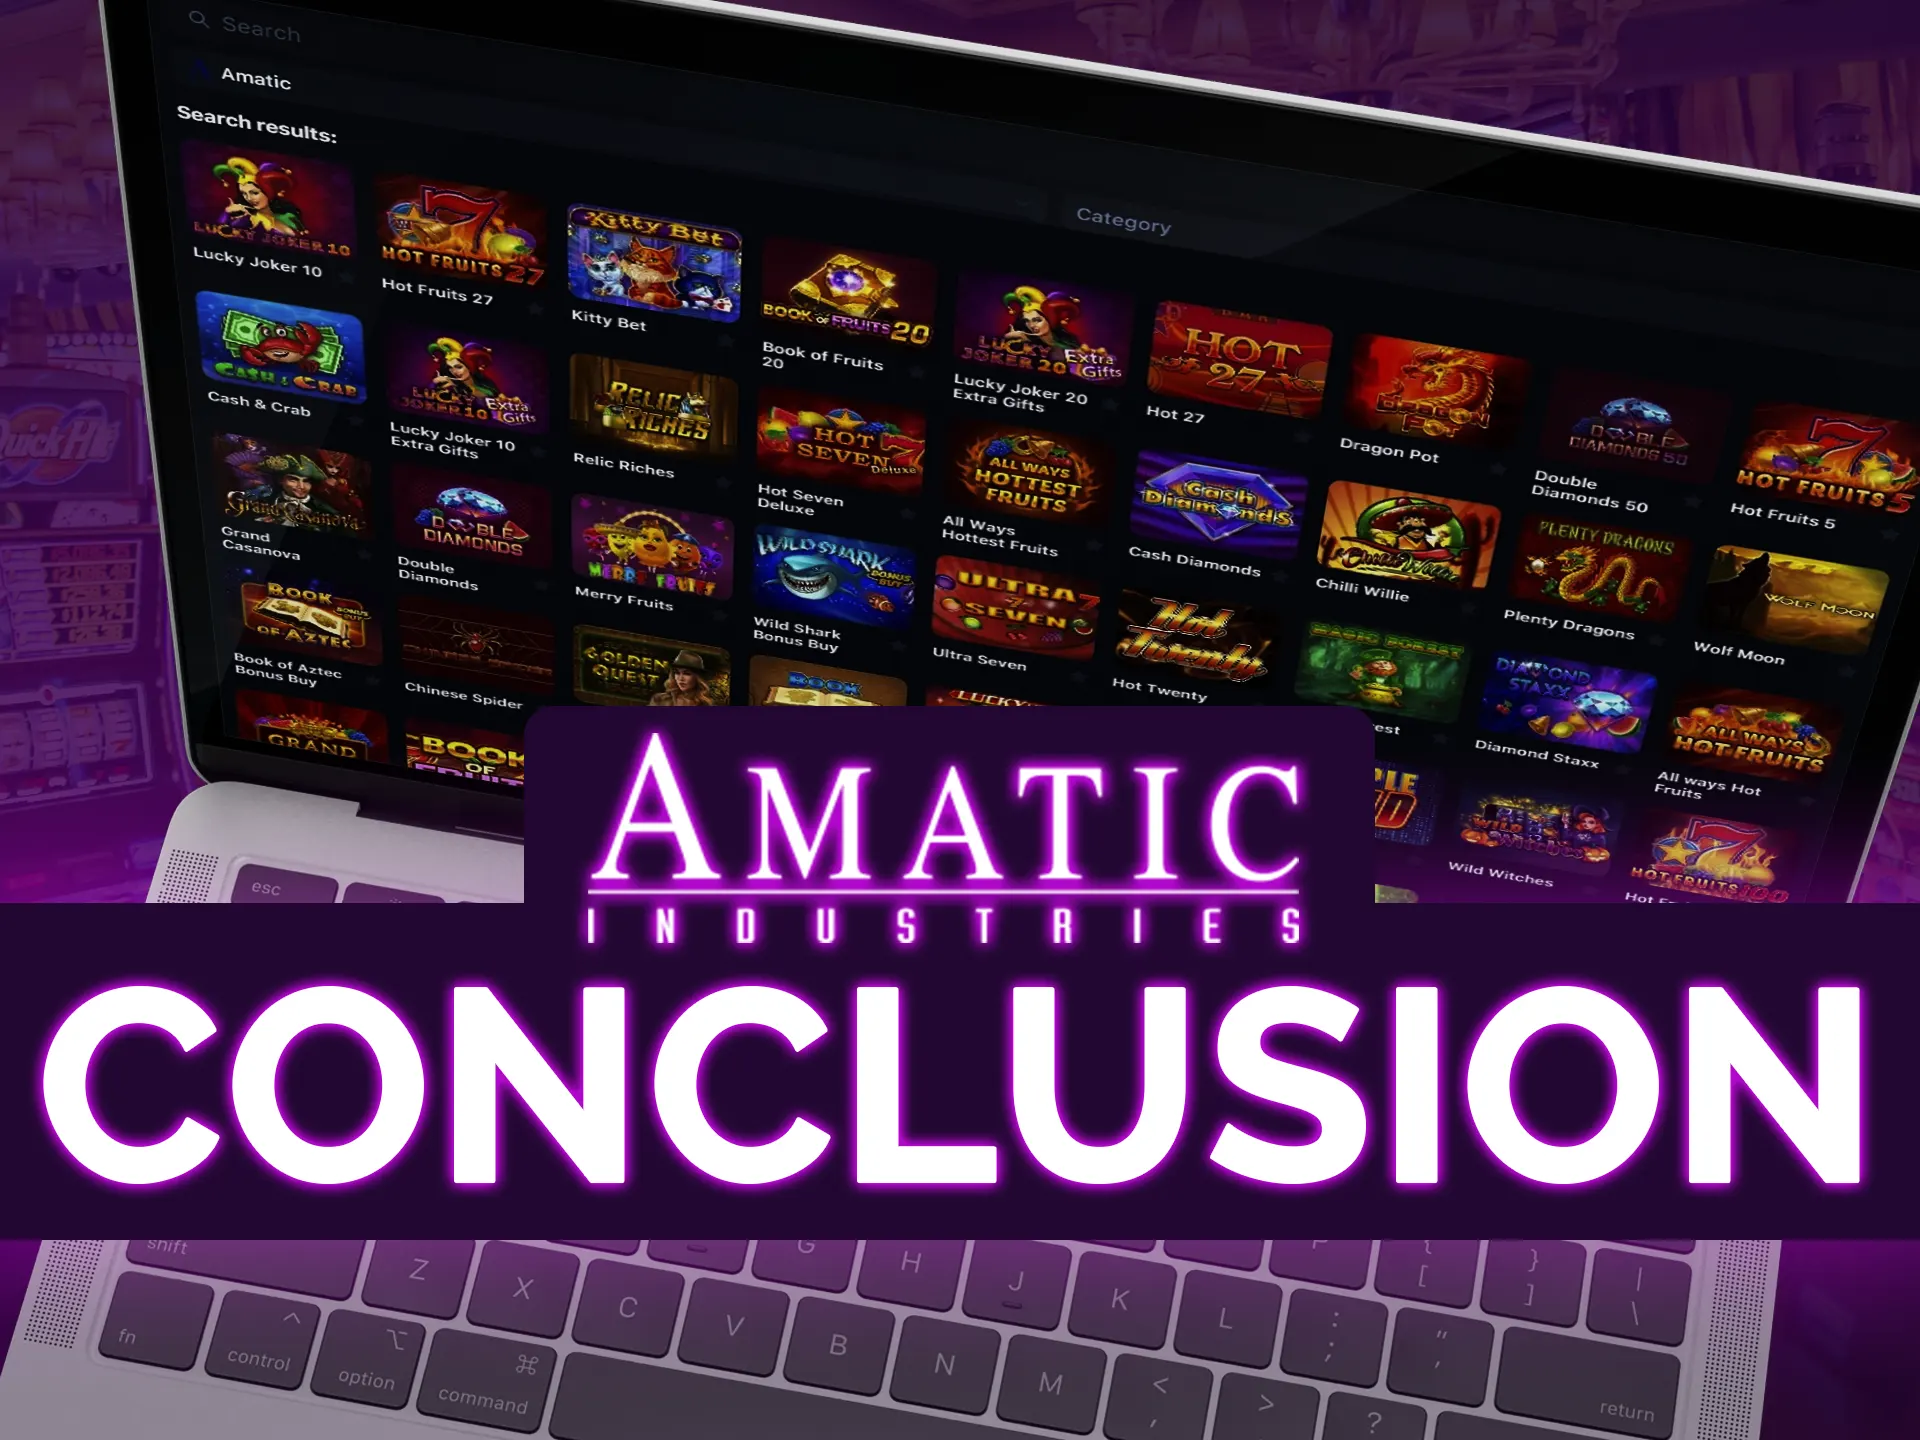 Amatic makes user-centric games with high quality and mobile-friendly.